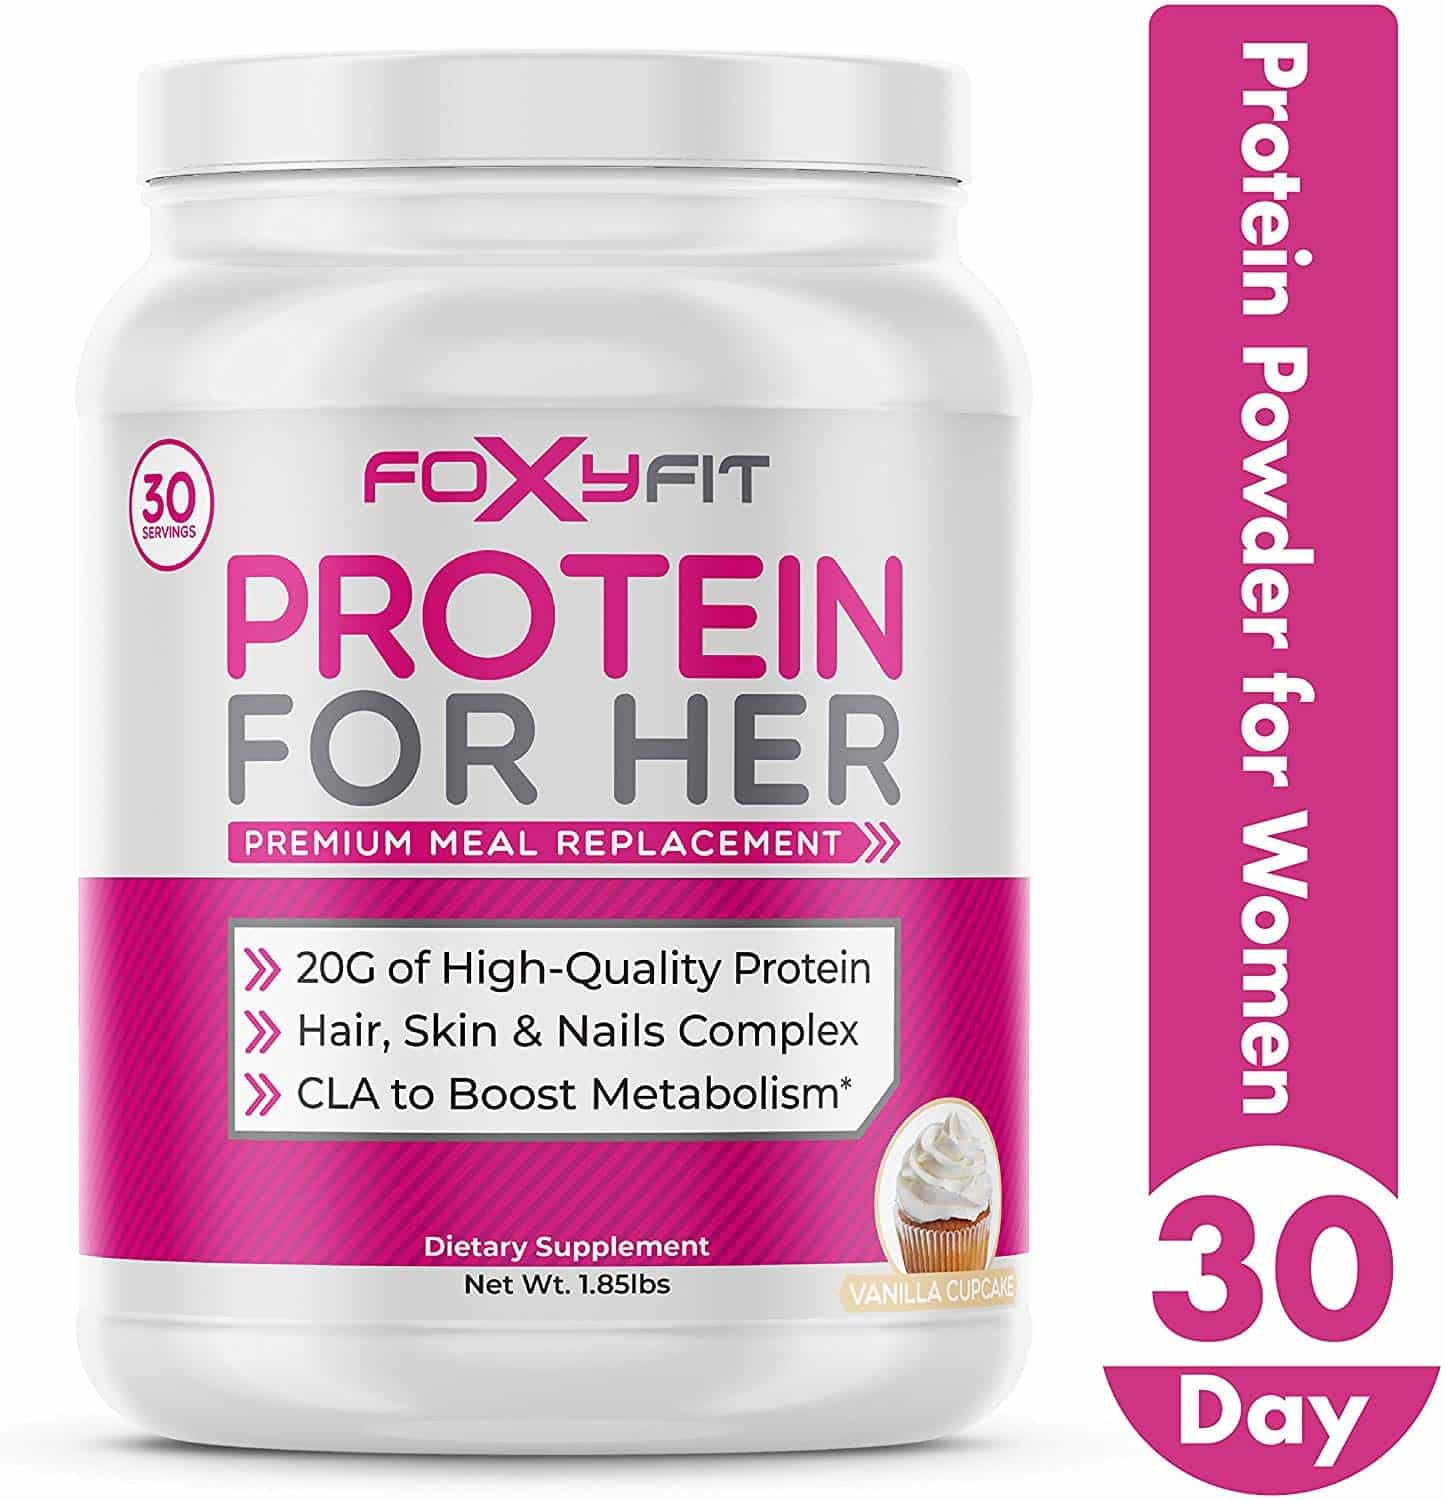 The 10 BEST Protein Powder For Women [2020 Reviews]